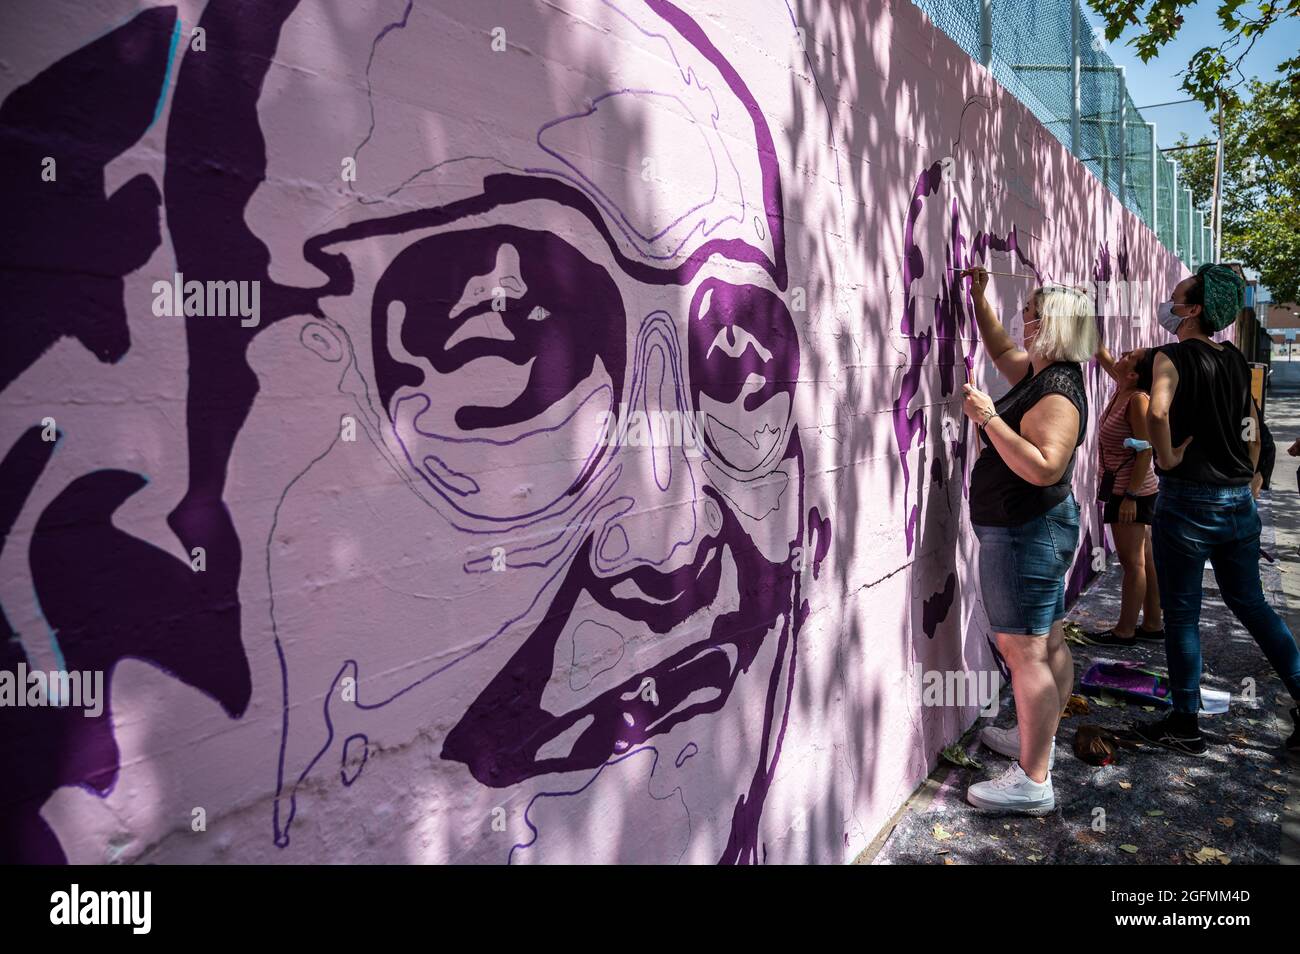 Madrid, Spain. 26th Aug, 2021. Members of UNLOGIC artistic group repainting a feminist mural that appeared vandalized during the past International Women's Day. The mural represents famous women from around the world, with the faces of 15 women who are part of history for their fight in favor of equality: Angela Davis, Frida Kahlo, Nina Simone, Rigoberta Menchu, Lucia Sanchez Saornil, Rosa Arauzo, Valentina Tereshkova, Chimamanda Ngozi, Emma Goldman, Kanno Sugato, Liudmila Pavlichenko, Billy Jean King, Gata Cattana, Rosa Parks, and Comandanta Ramona. Credit: Marcos del Mazo/Alamy Live News Stock Photo